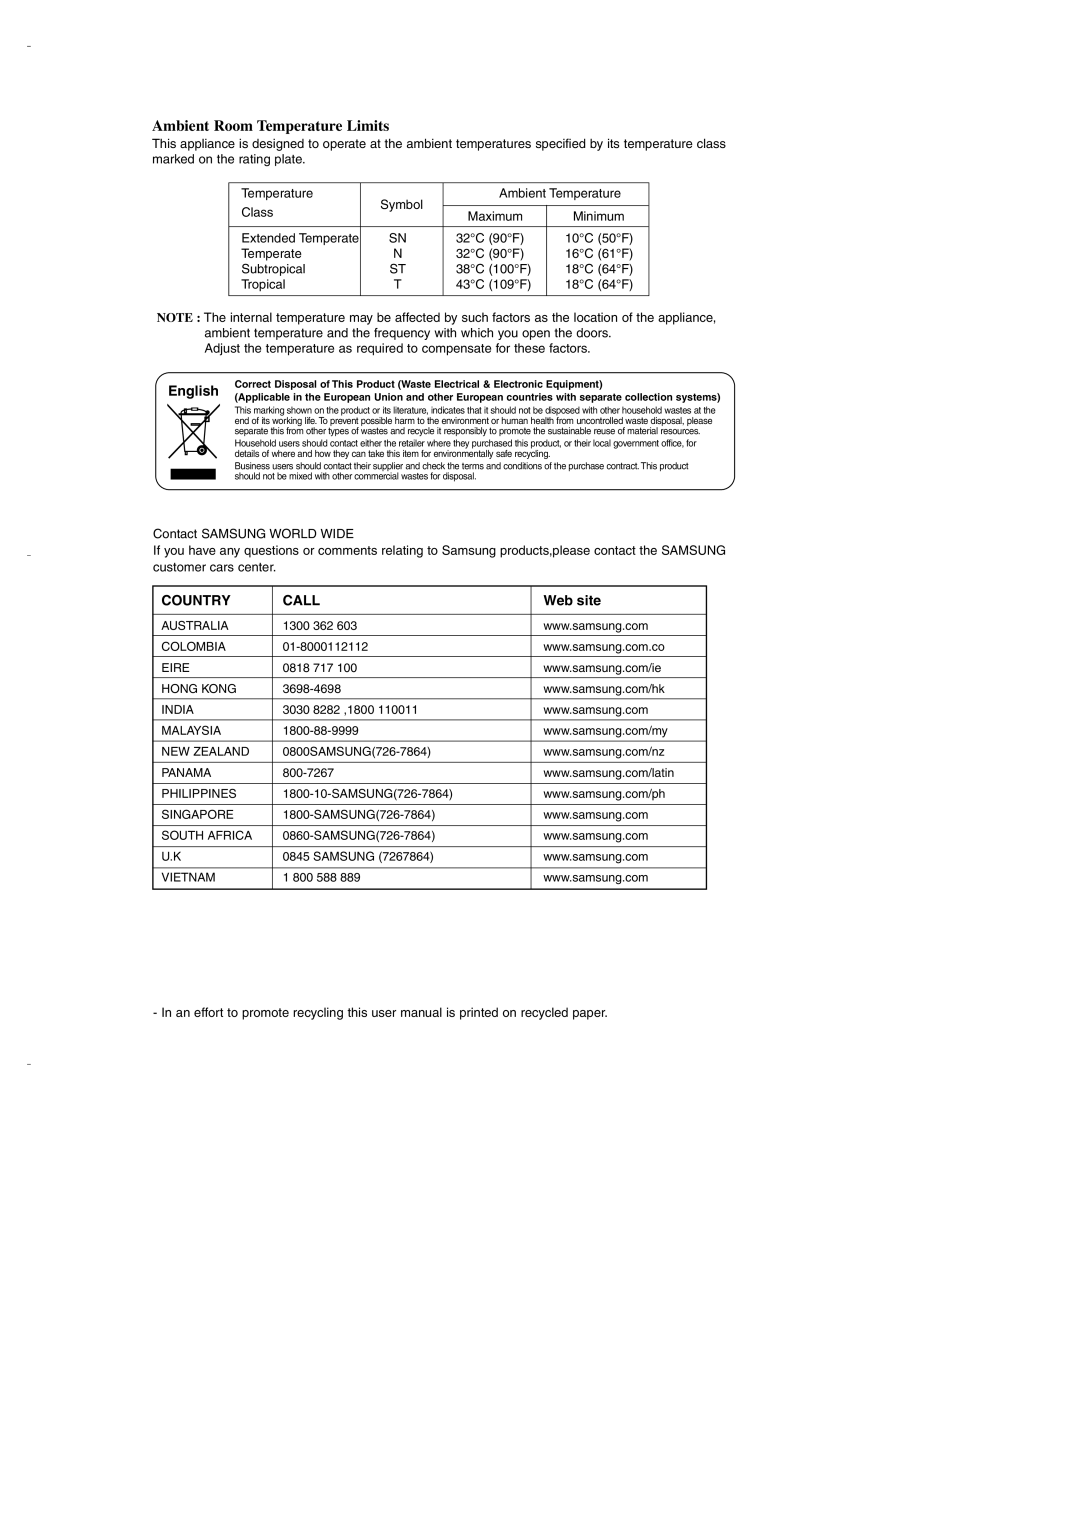 Samsung DA99-00275B owner manual Ambient Room Temperature Limits, English, Country, Call, Web site 